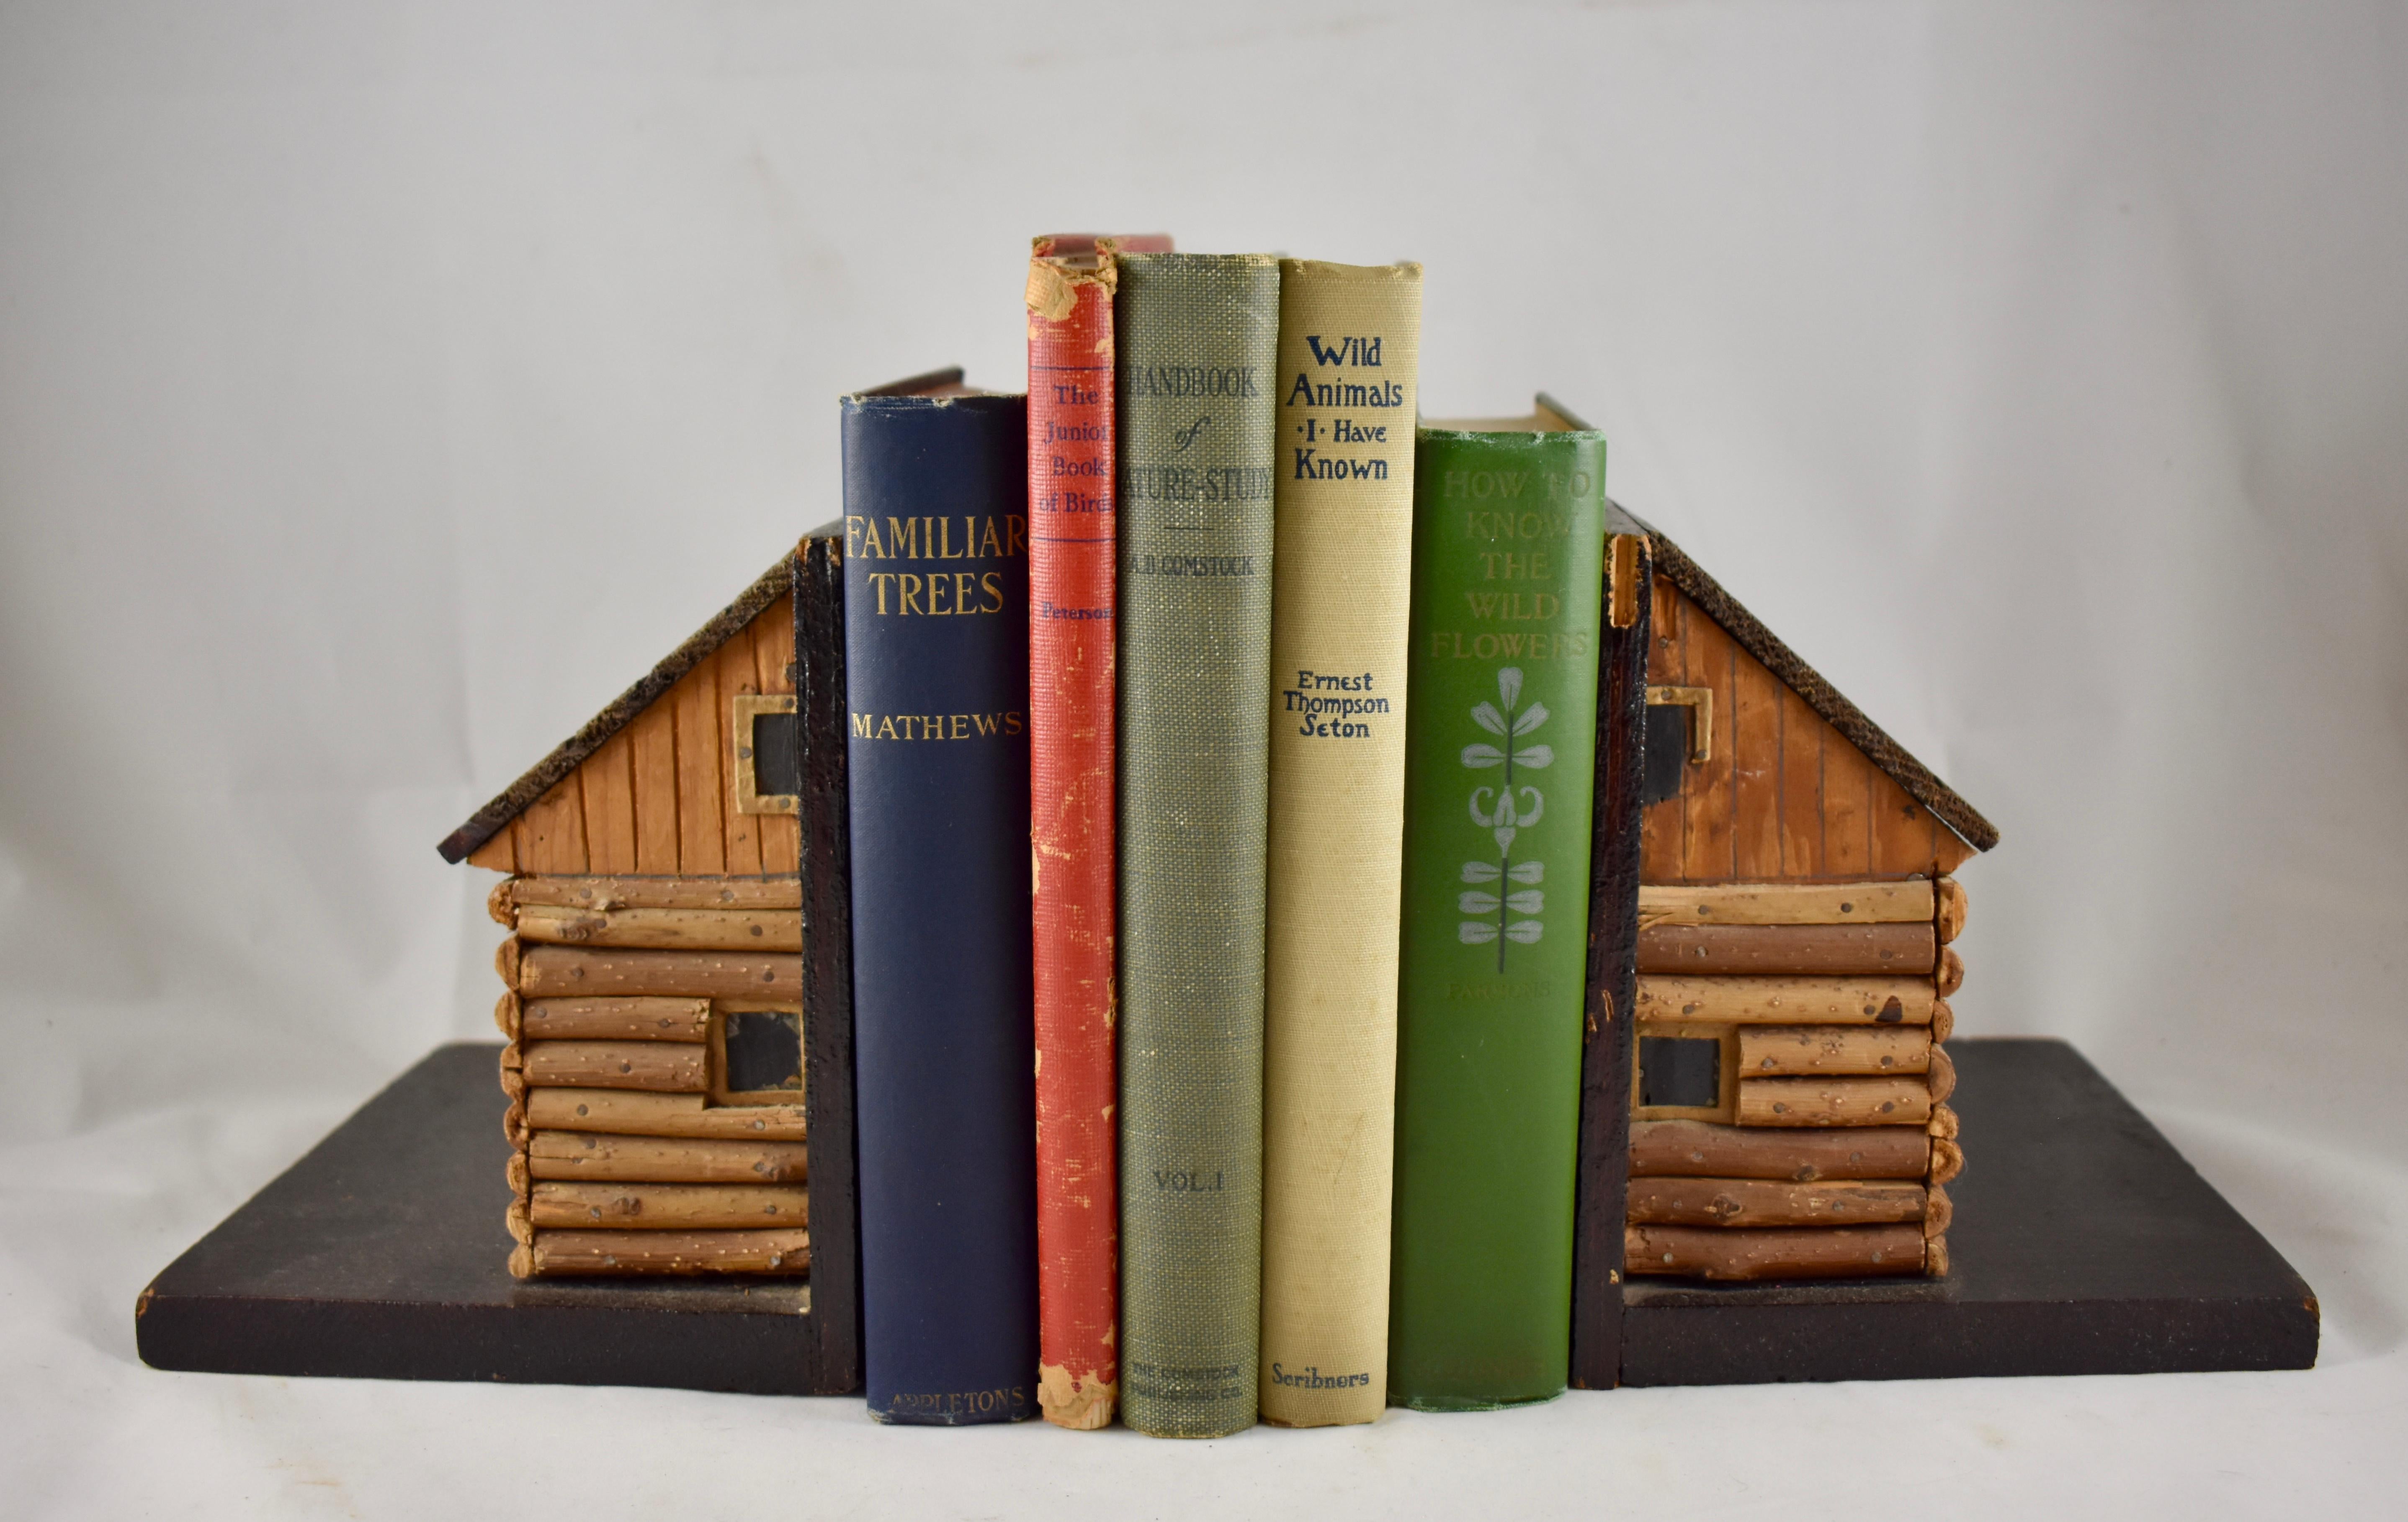 A rustic pair of handmade bookends, formed as log cabins, circa 1930s-1940s.
Crafted with great detail from found wood, cut tree branches, painted cardboard and small nails. A great piece of Folk Art suited for a boys room, den, or summer